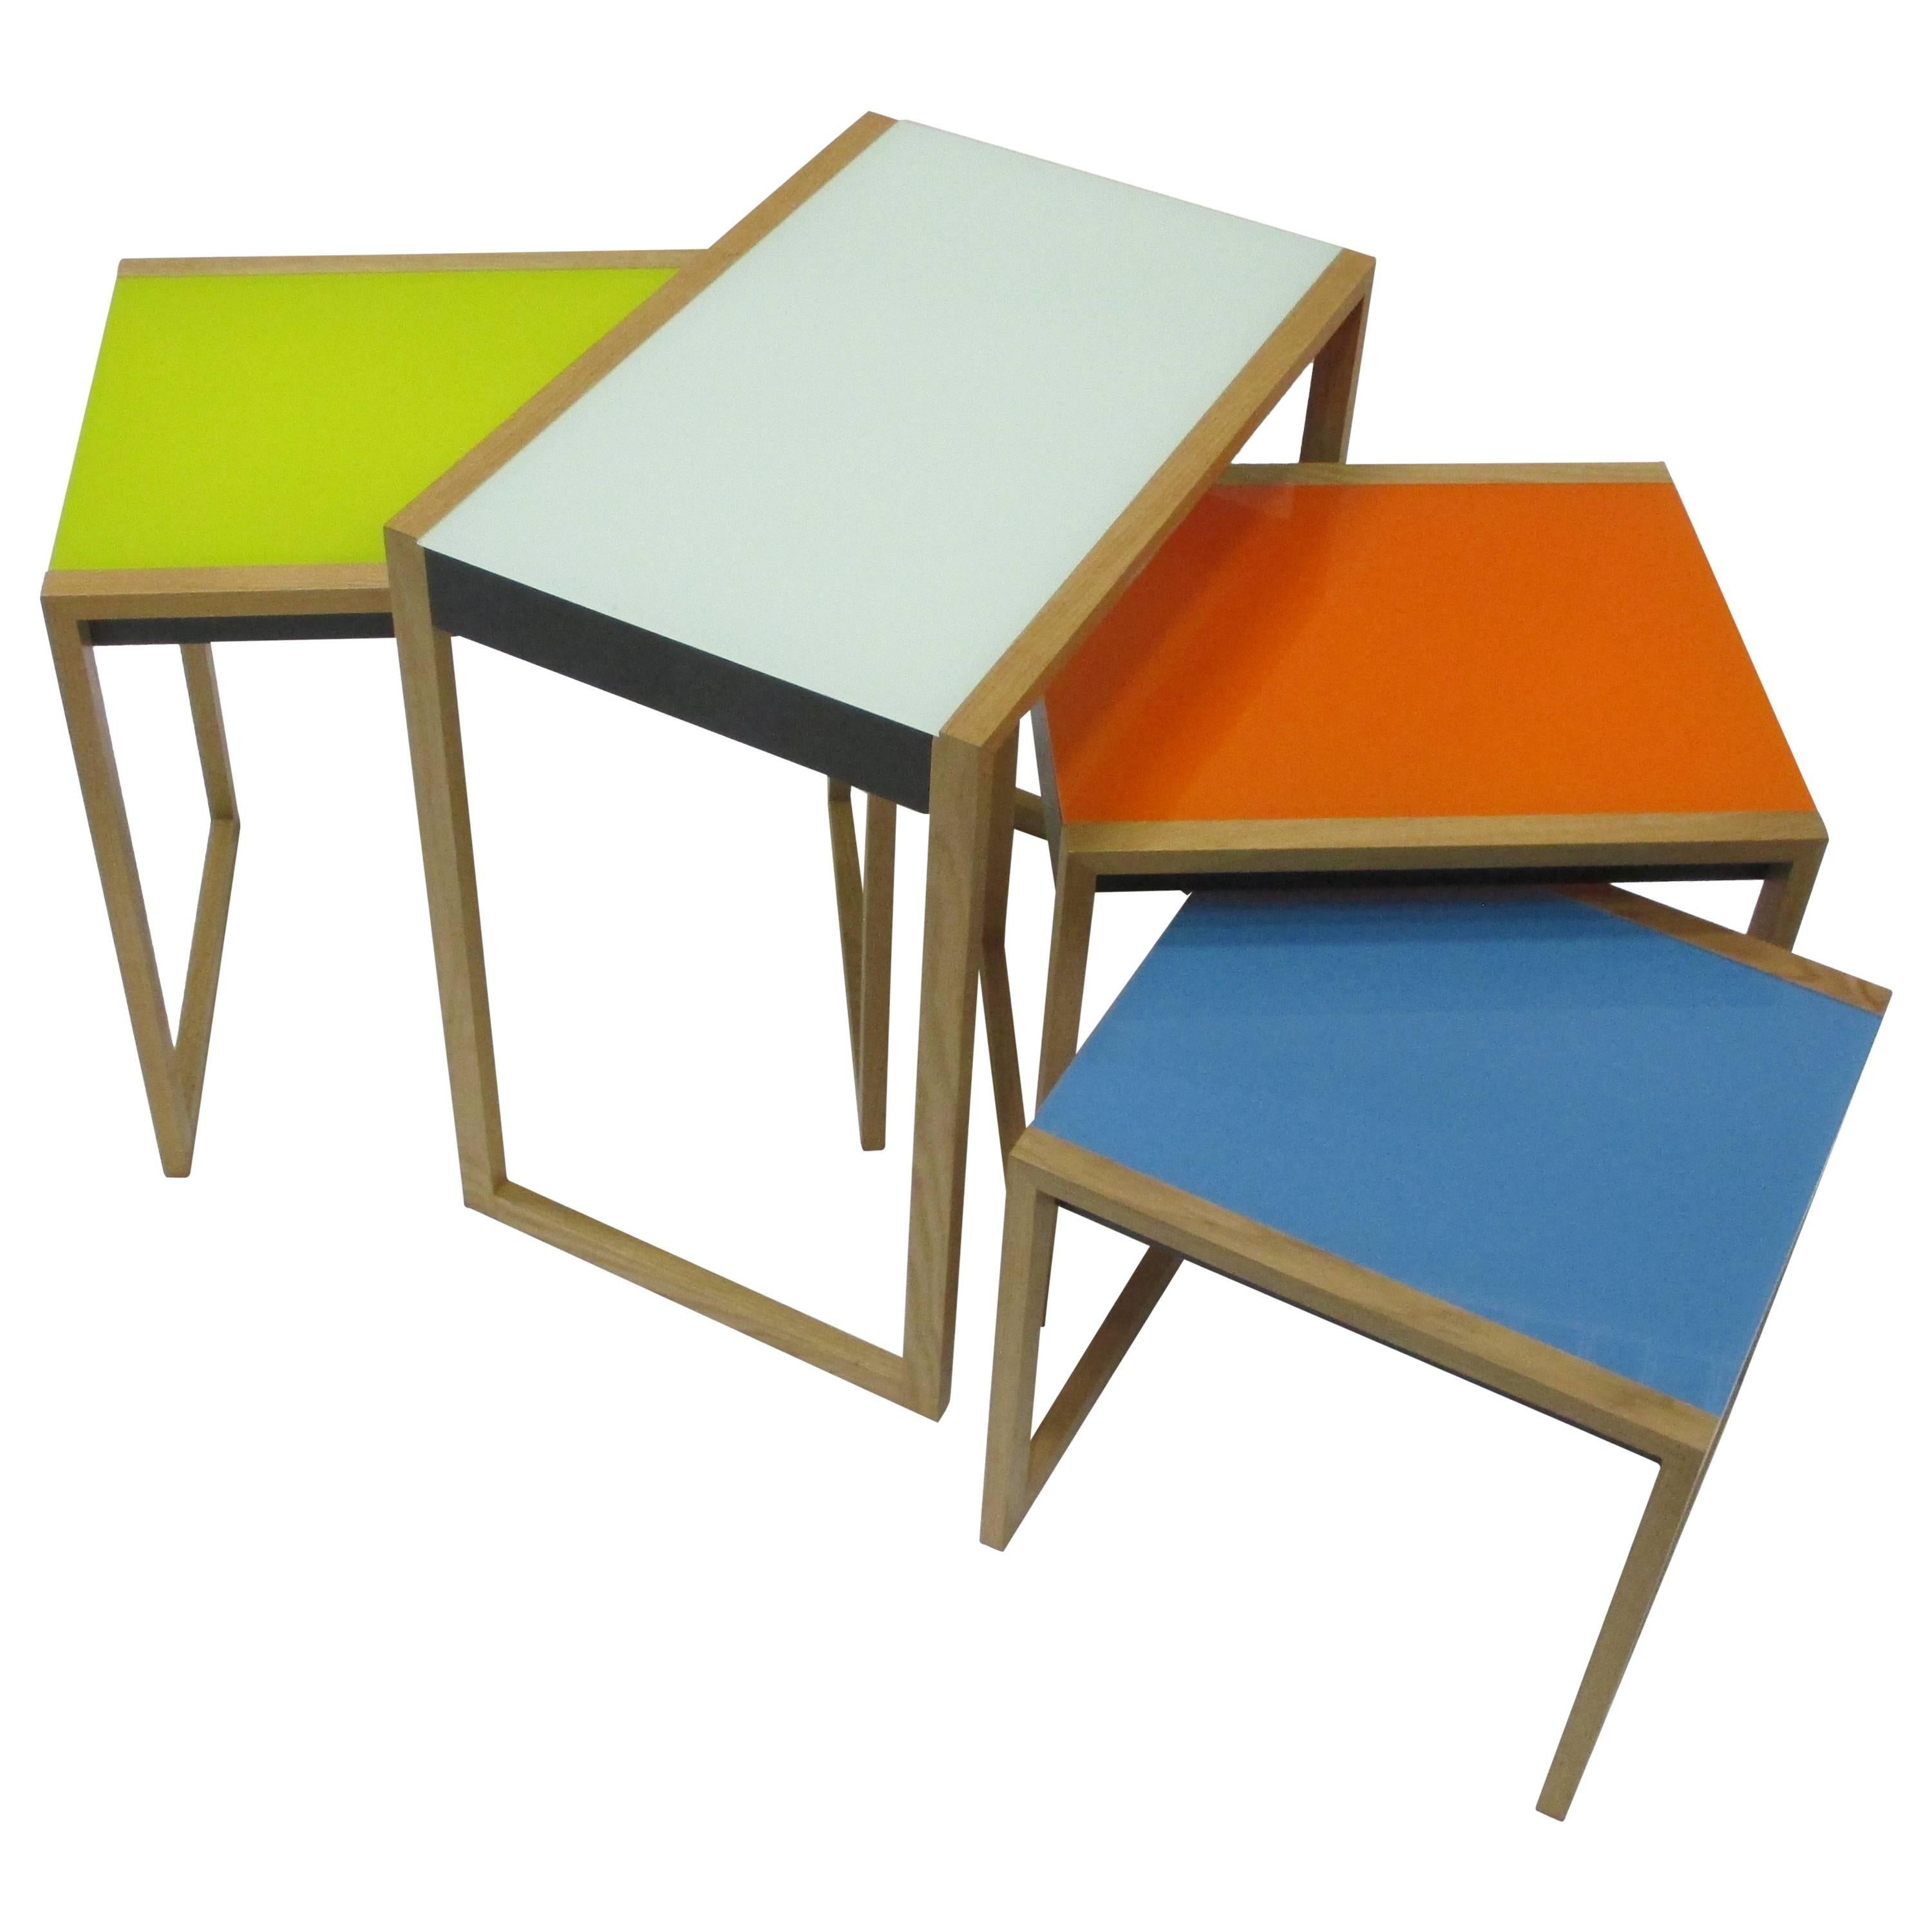 Four Stacking Side Tables by Josef Albers